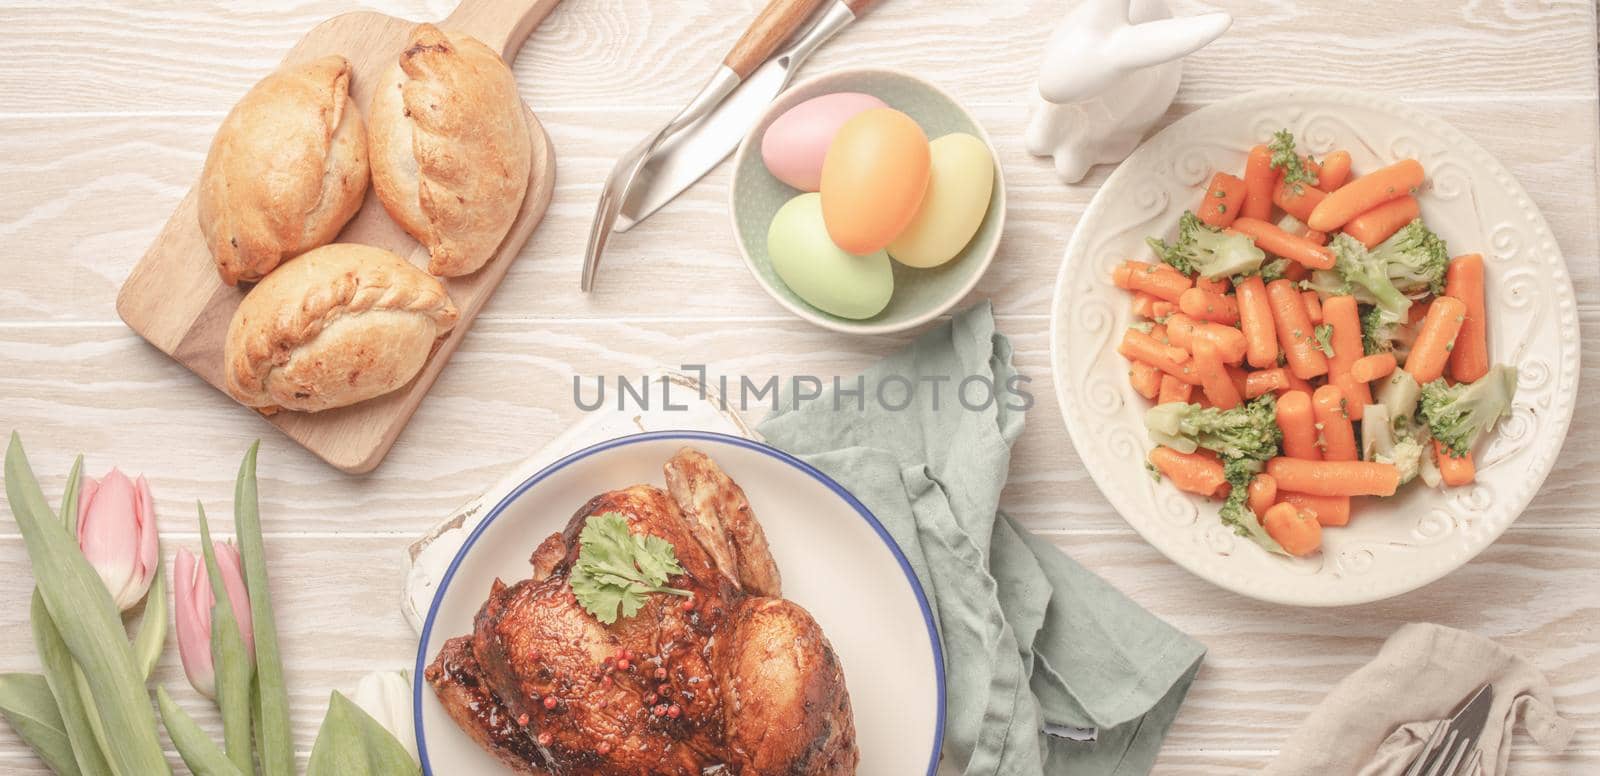 Easter food on white rustic table: colored eggs, roasted chicken, vegetables, buns by its_al_dente